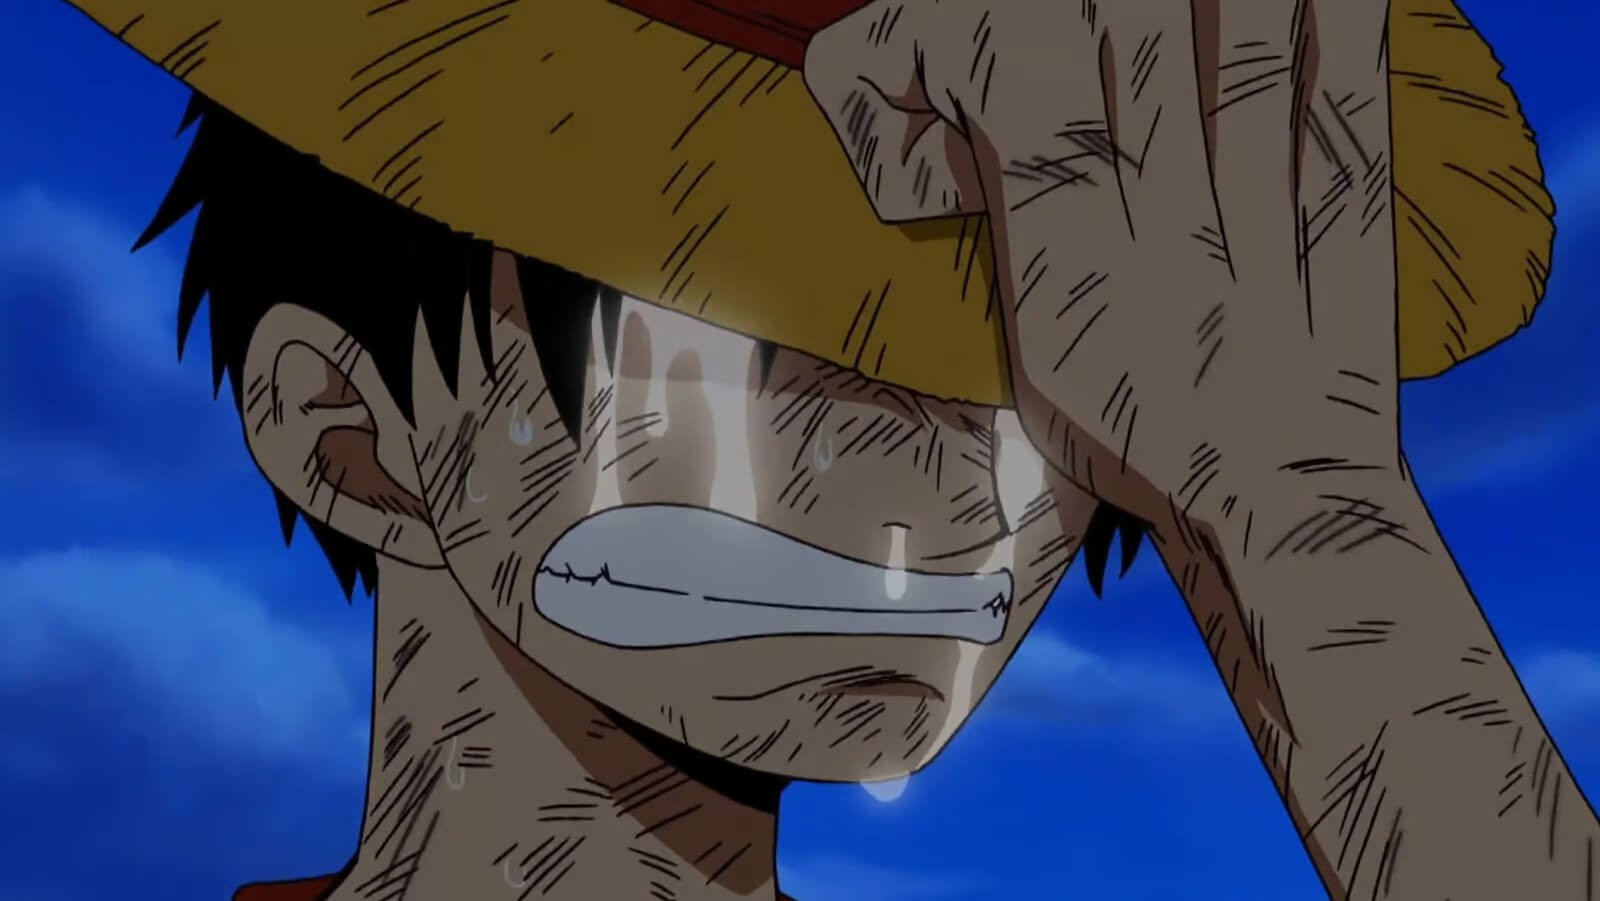 Luffy after Portgus D. Ace death in a still from One Piece